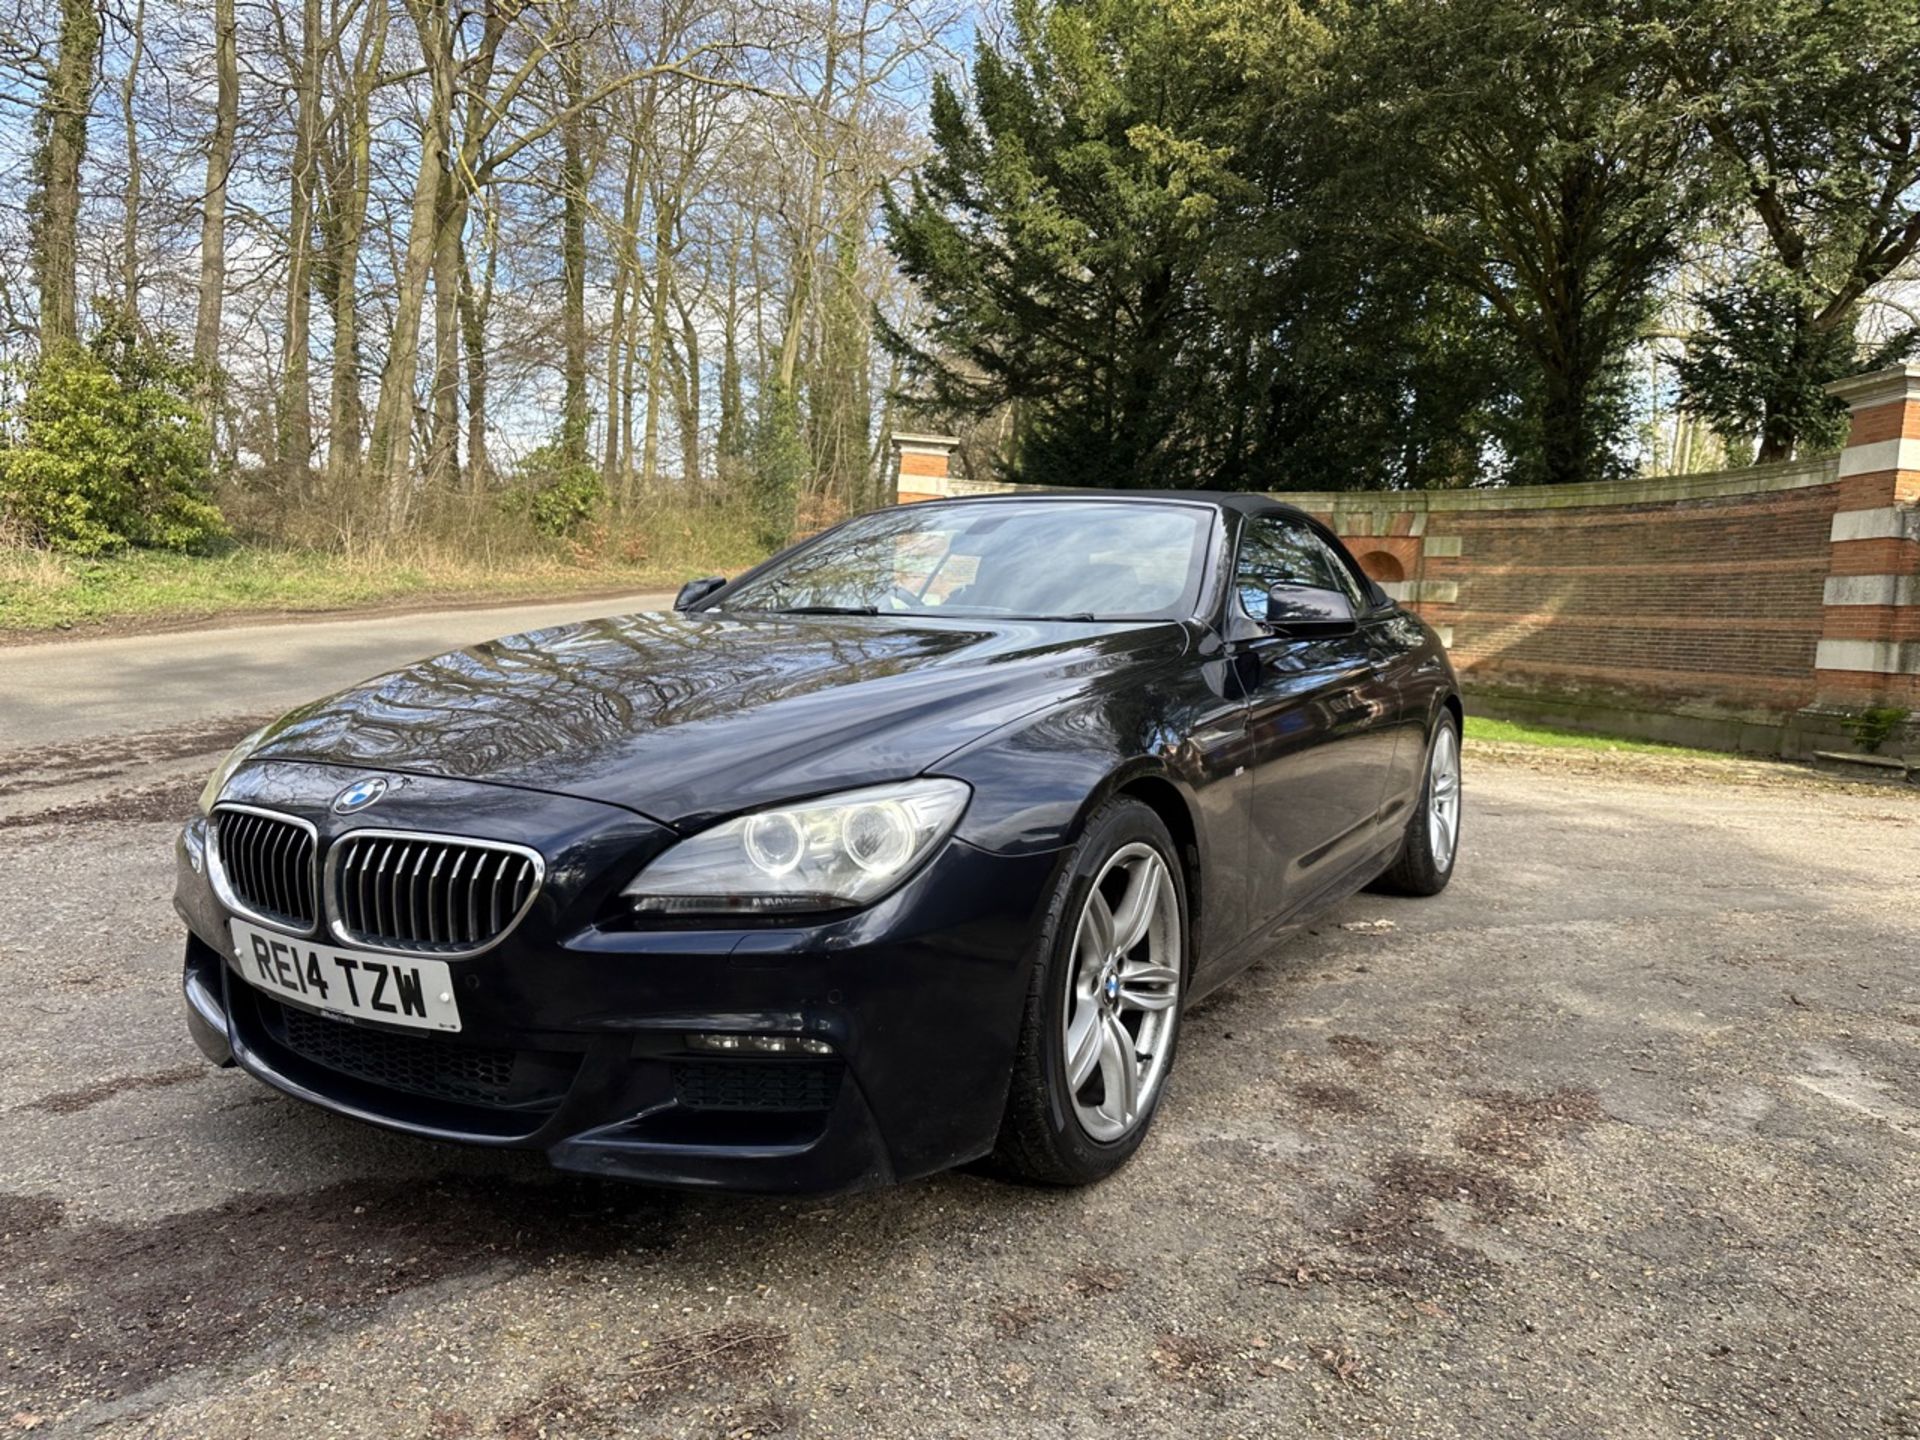 BMW 6 SERIES 640d (M SPORT) Ultimate Summer Car - AUTOMATIC - Convertible - 2014 - 3L Diesel - Image 8 of 18